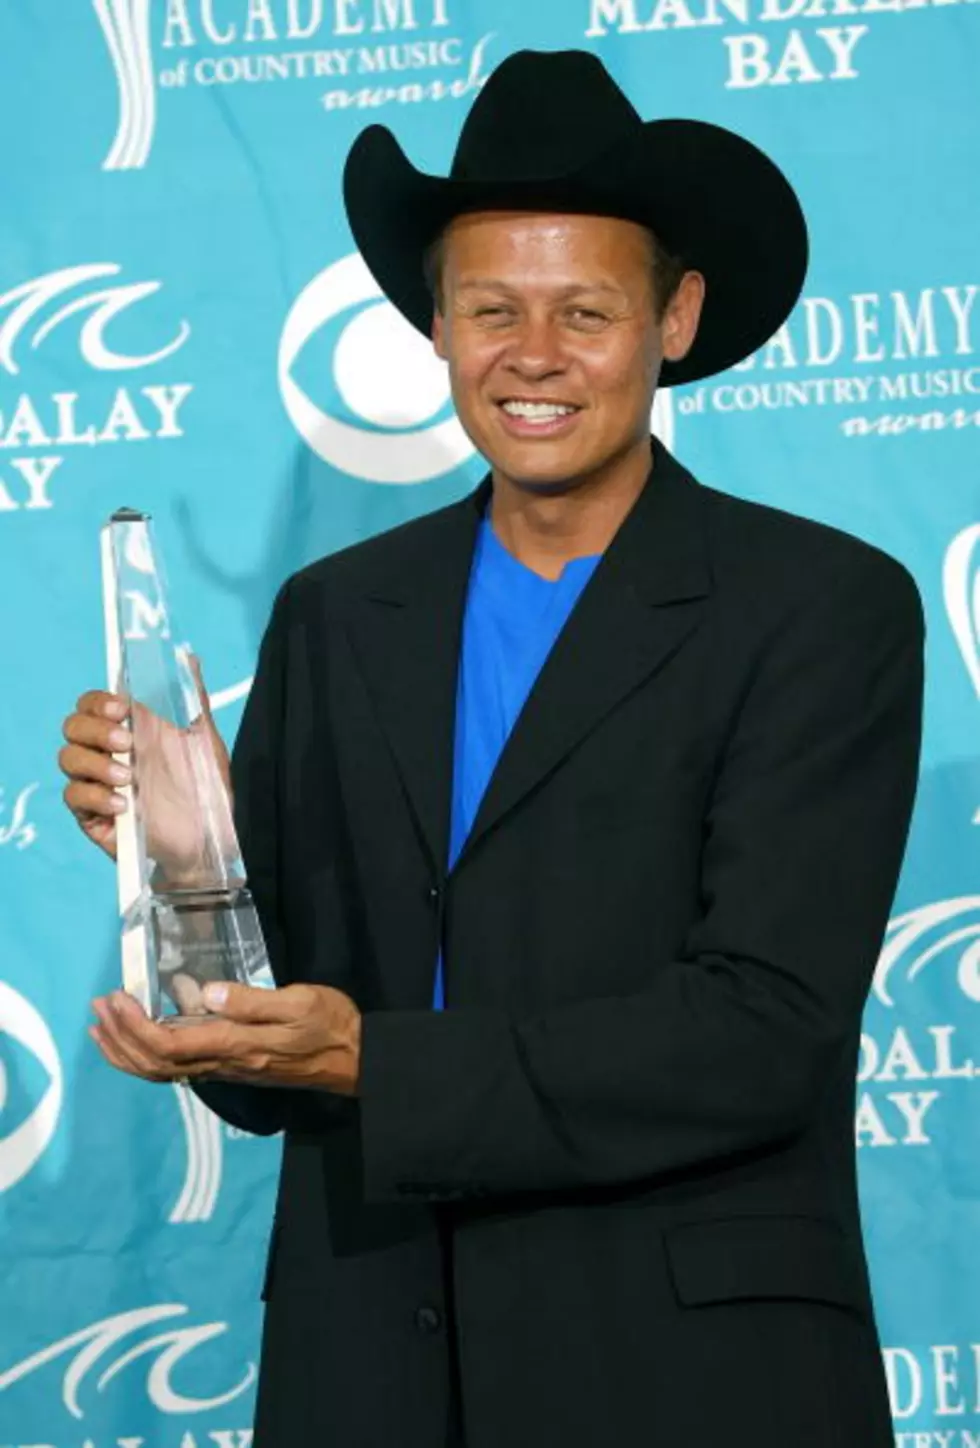 Neal McCoy&#8217;s Father Passed Away on Saturday